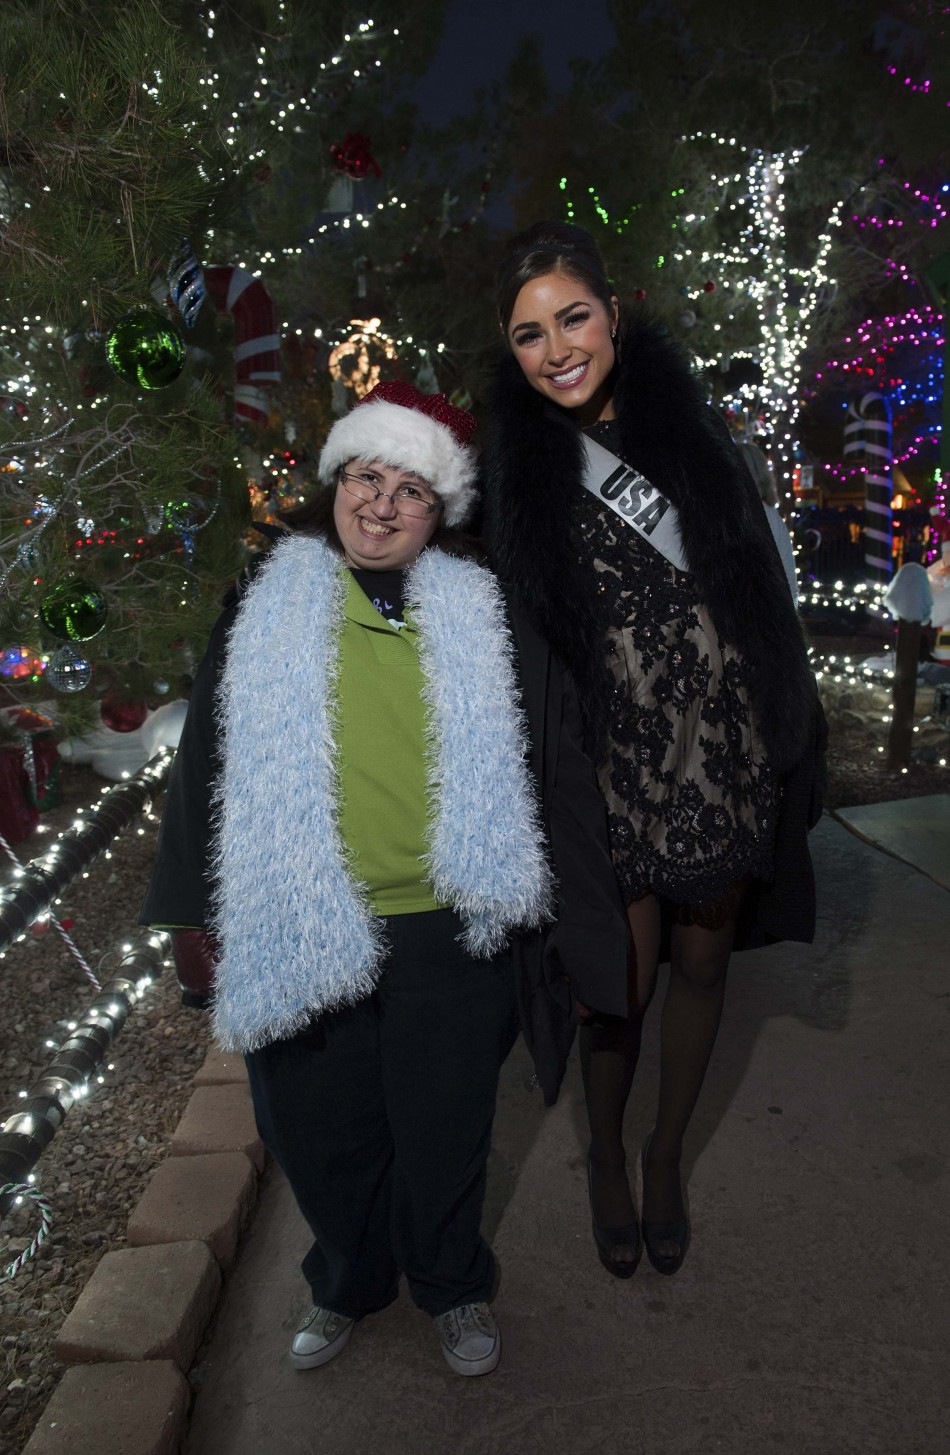 Miss USA Culpo poses with her Best Buddy during the Miss Universe National Gift Auction in Las Vegas